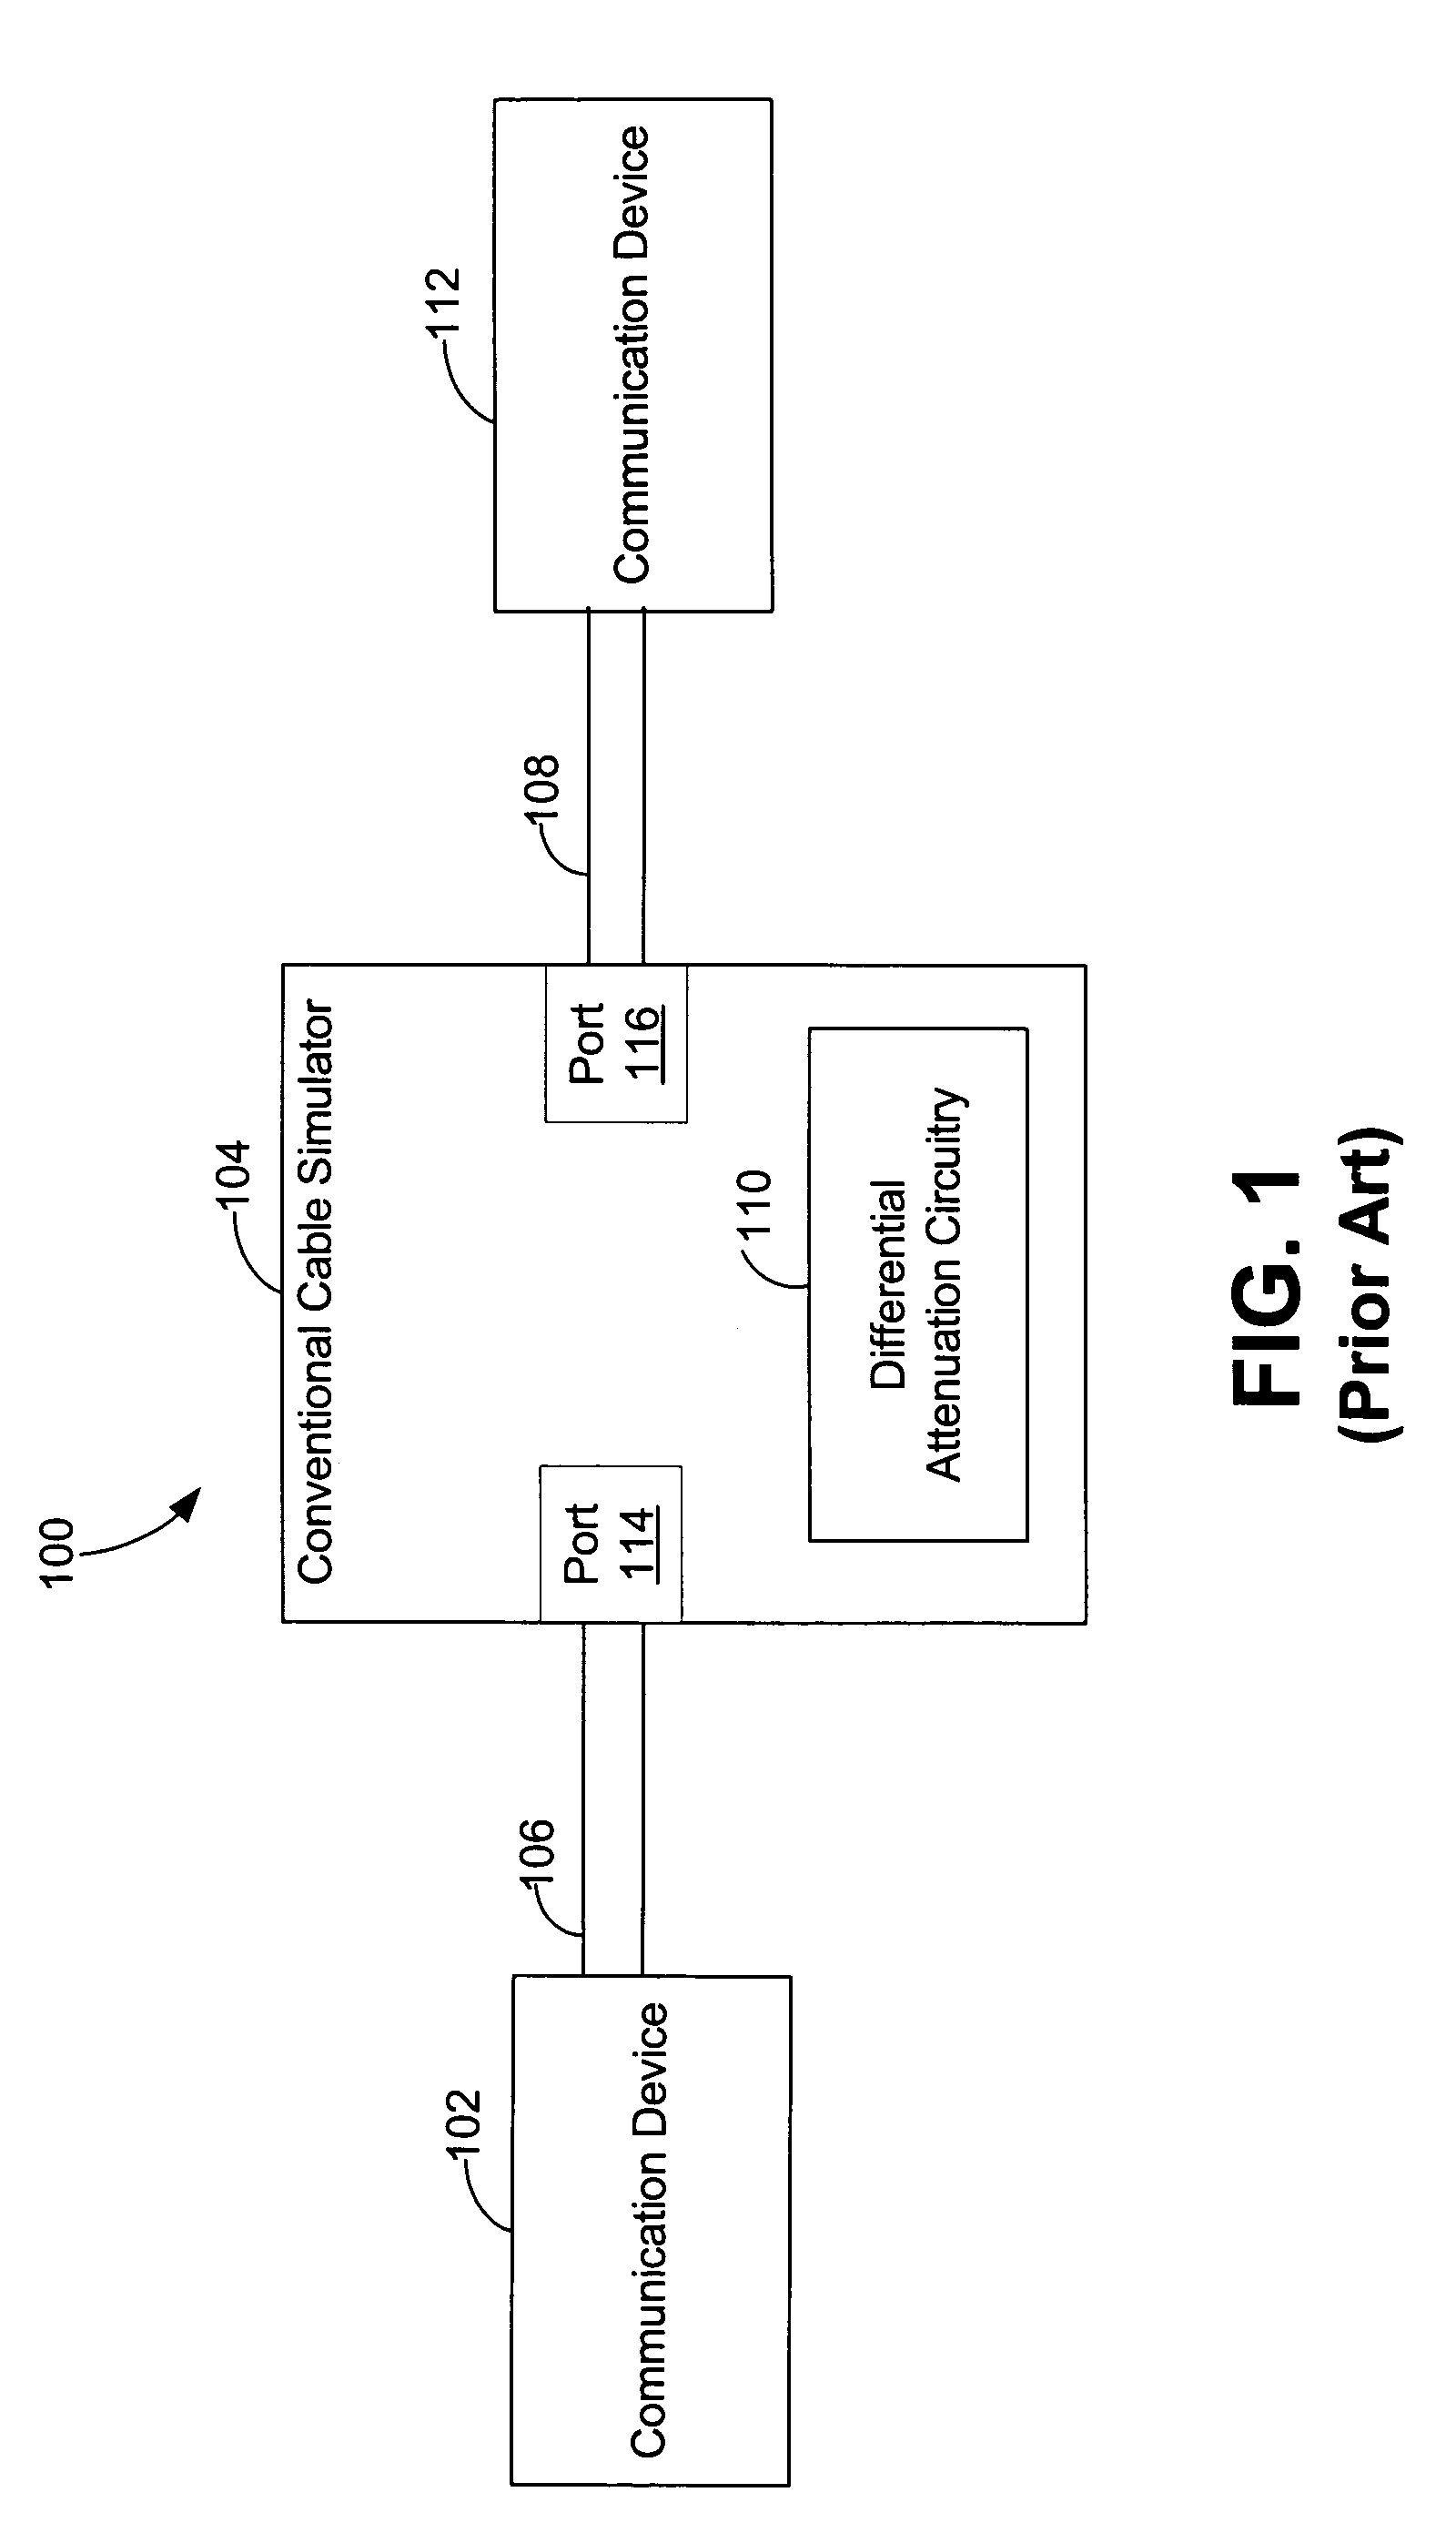 Cable simulation device and method